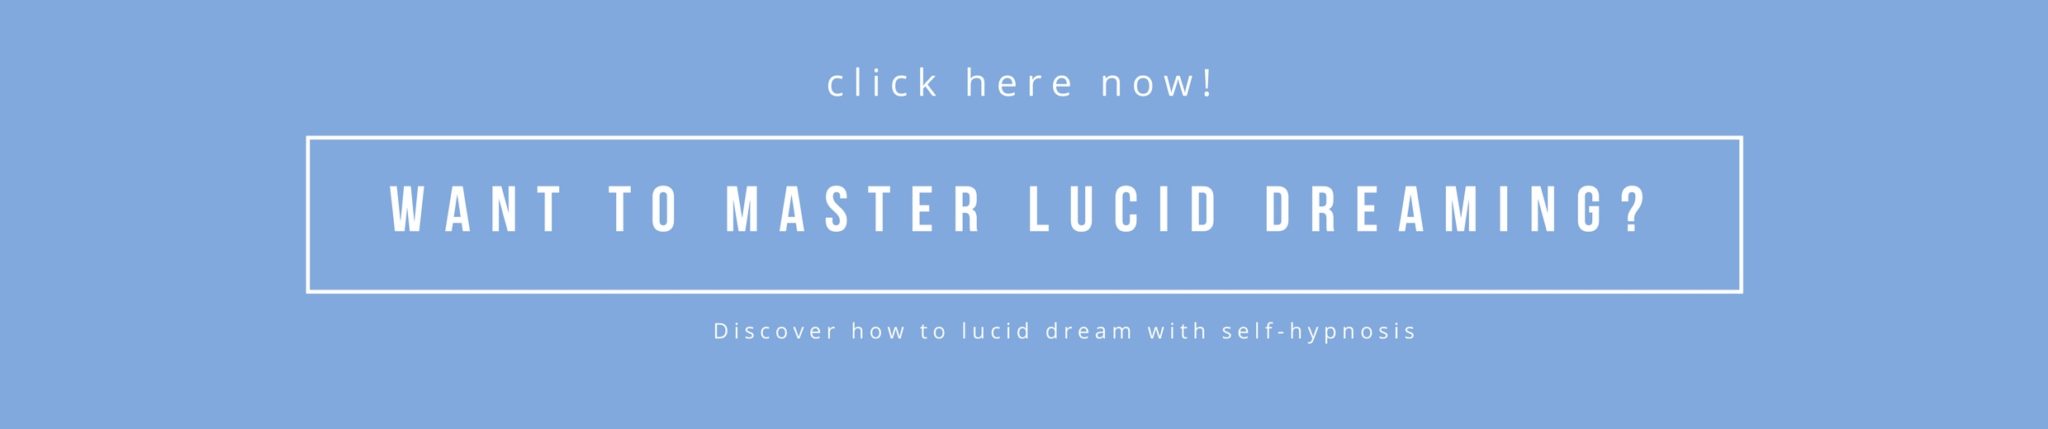 Want to master lucid dreaming_